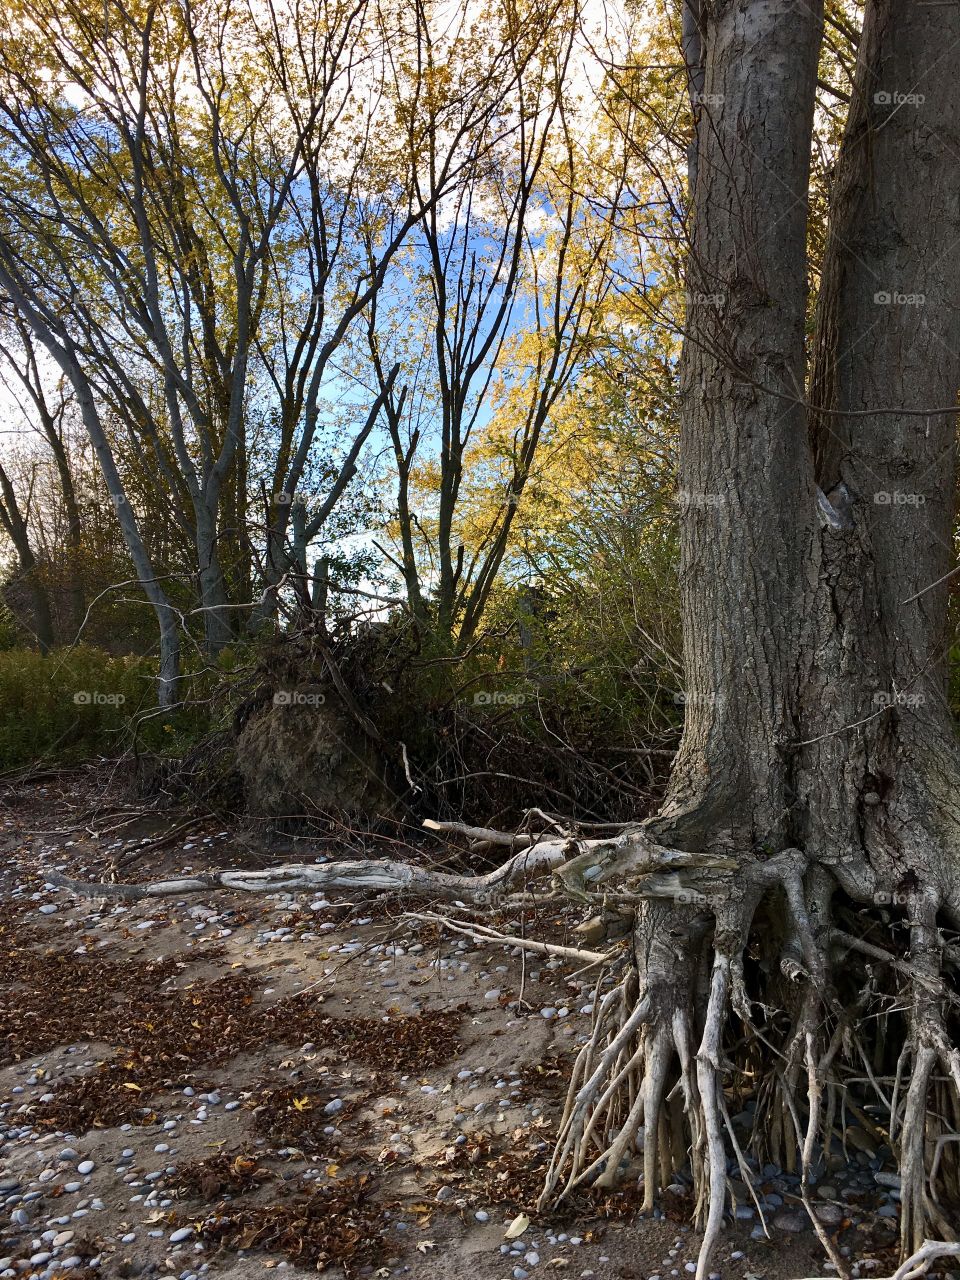 Older trees with exposed roots due to the water pulling the ground away. The sky is quite a beautiful blue with some lush green foliage and the leaves are beginning to turn yellow.